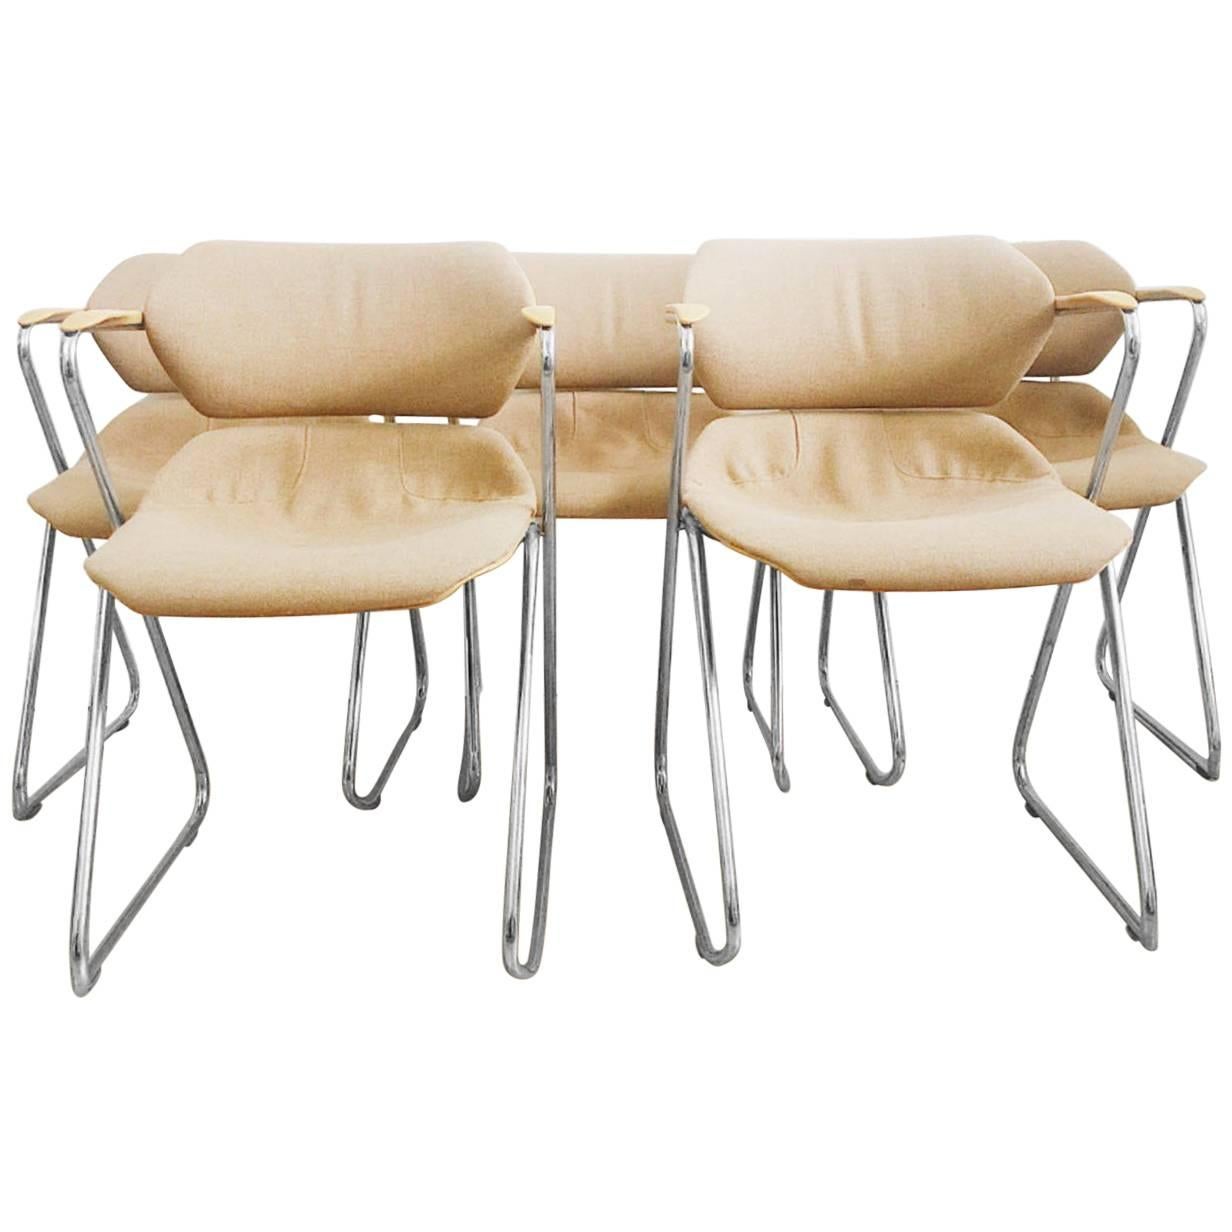 Set of Five Stackable Chrome Chairs by Hugh Acton for American Seating